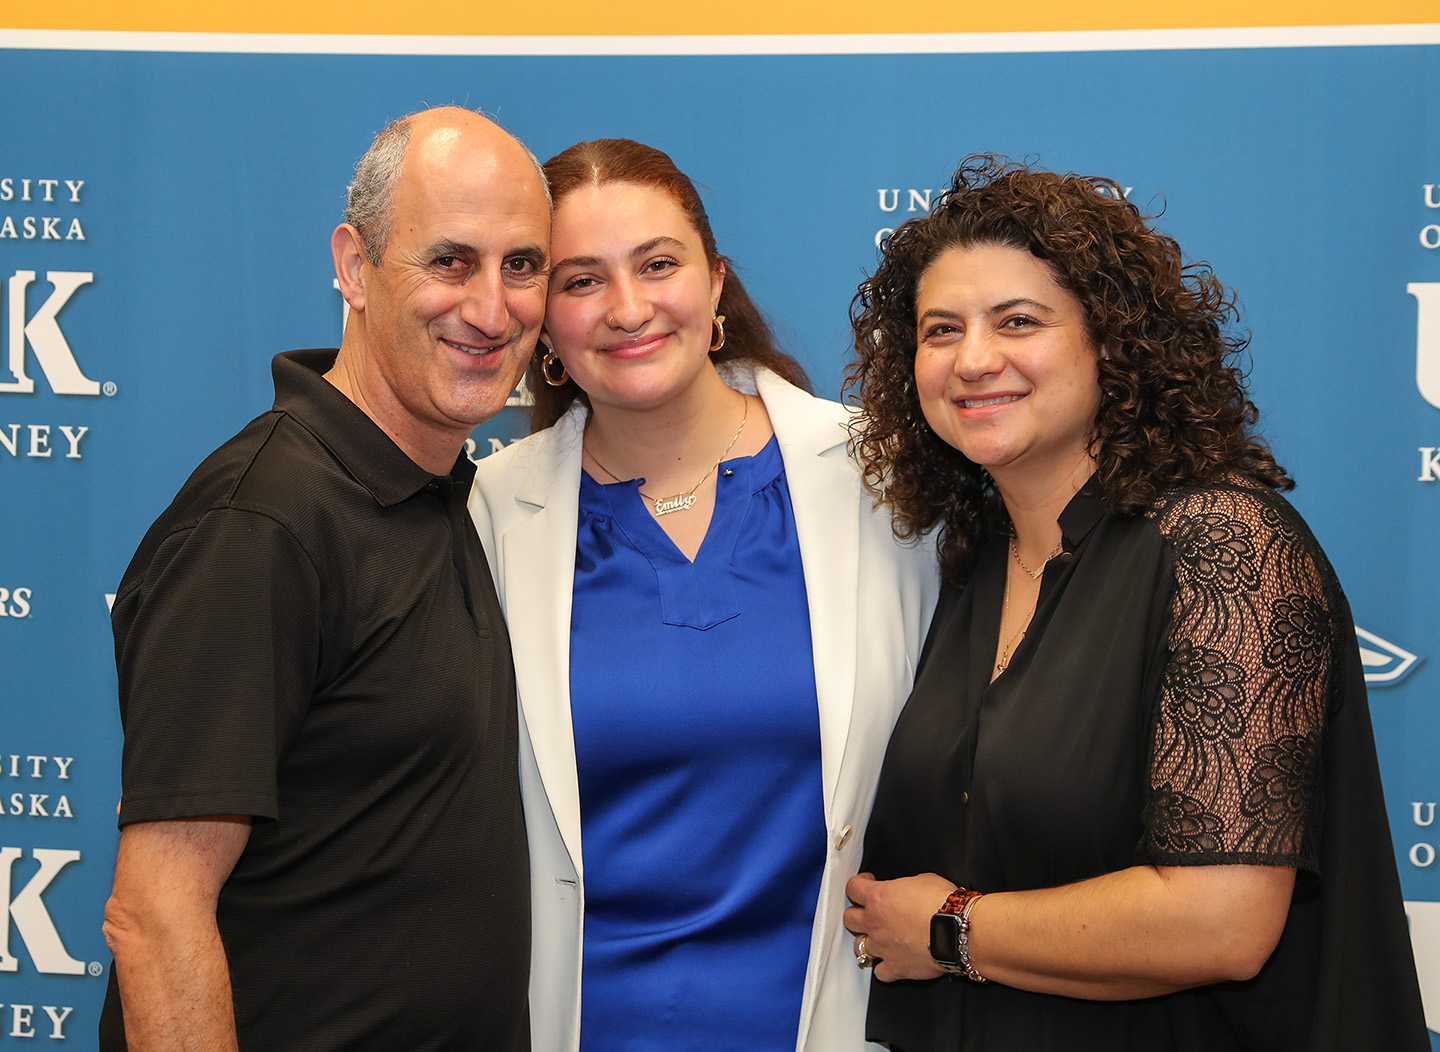 Emily Saadi poses for a photo with her parents, Camil and Nadia, during a UNK Student Government inauguration. Saadi served as student body president in 2022-23.